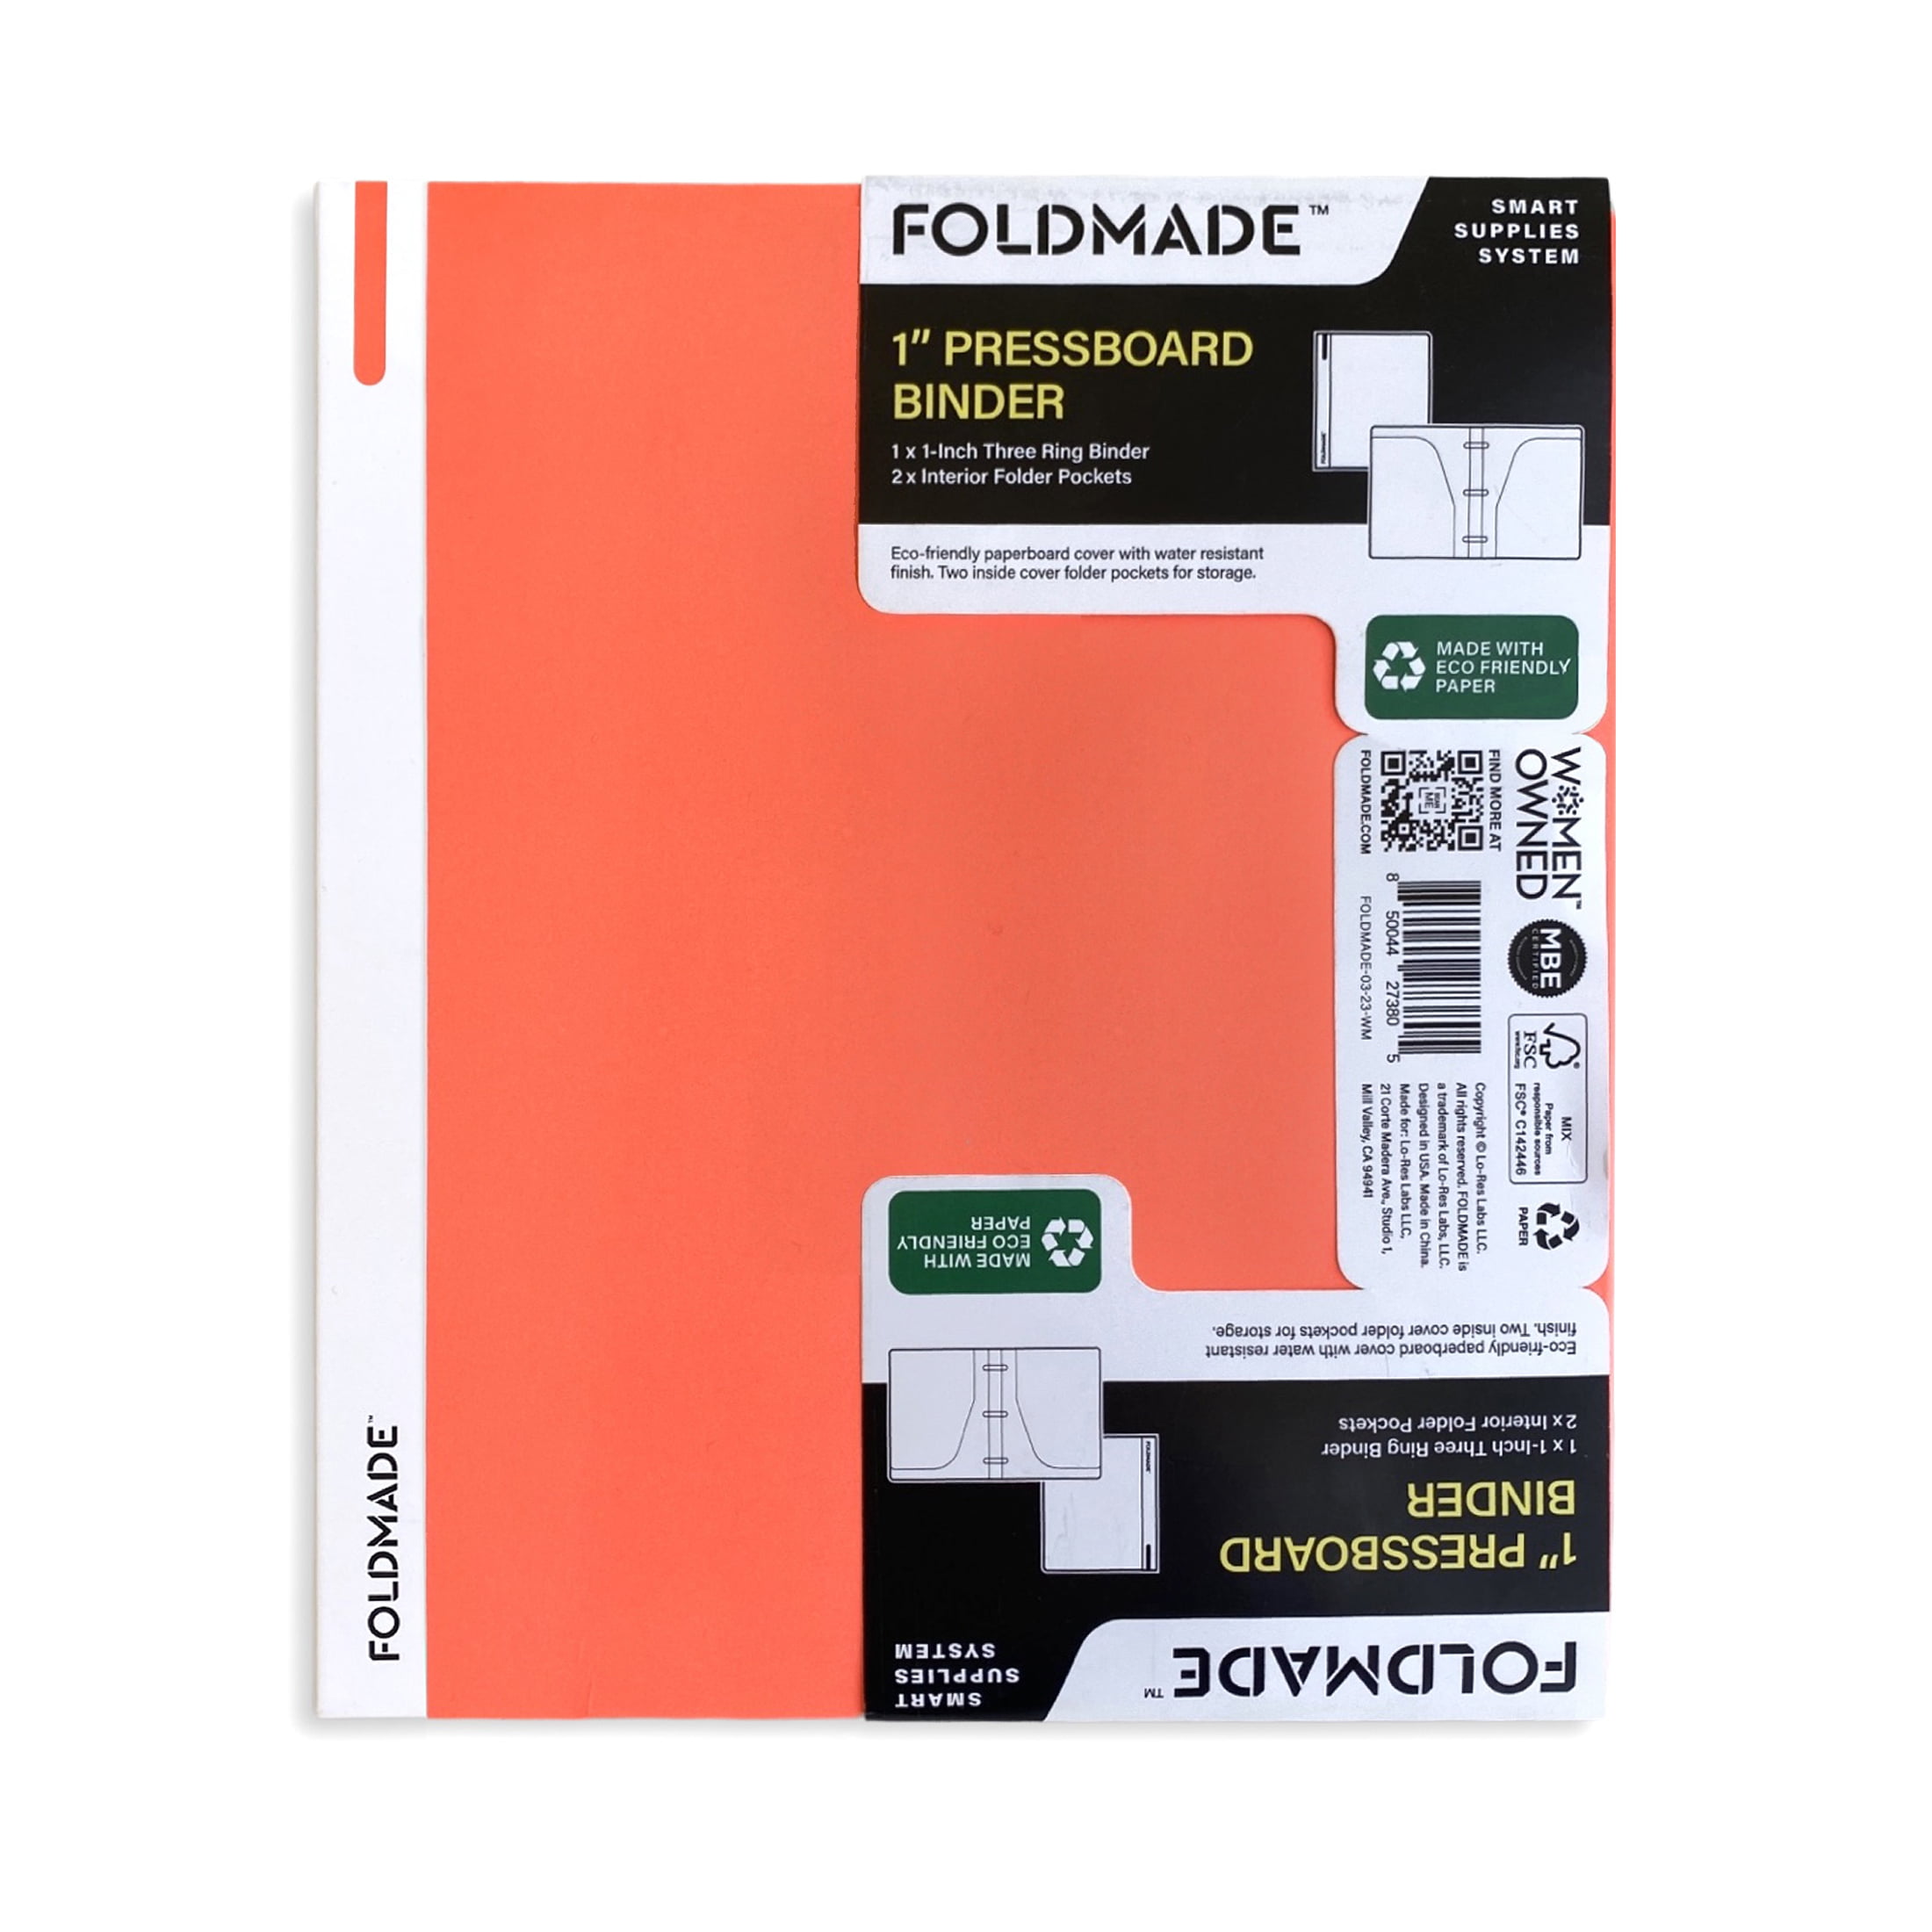 FSC Recycled Hard Paperboard Coated Book Binding Board For Archival Cover